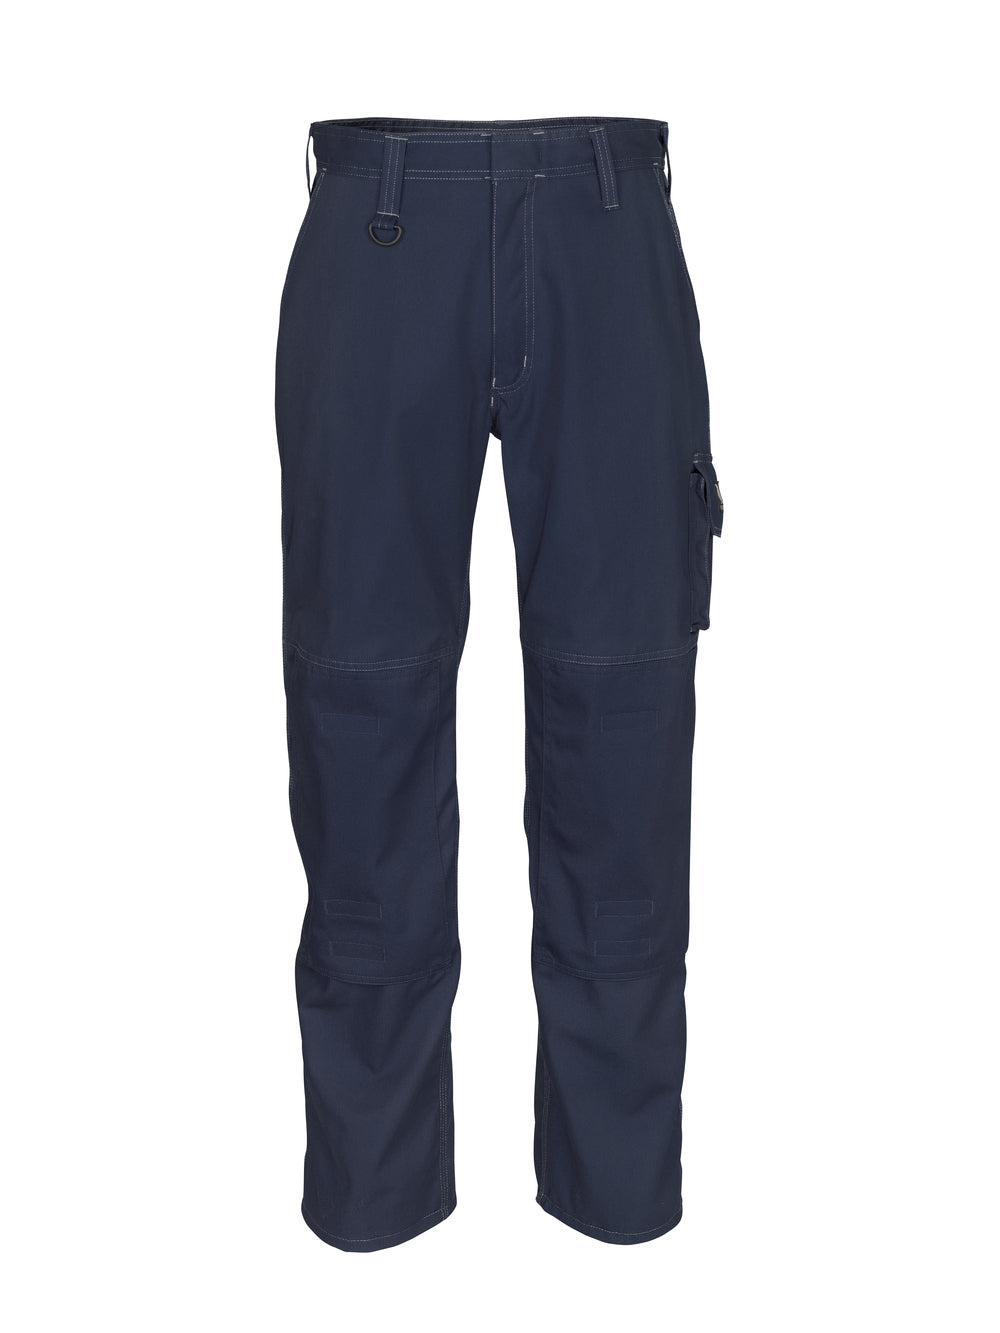 MASCOT®INDUSTRY Trousers with kneepad pockets Biloxi 12355 - DaltonSafety